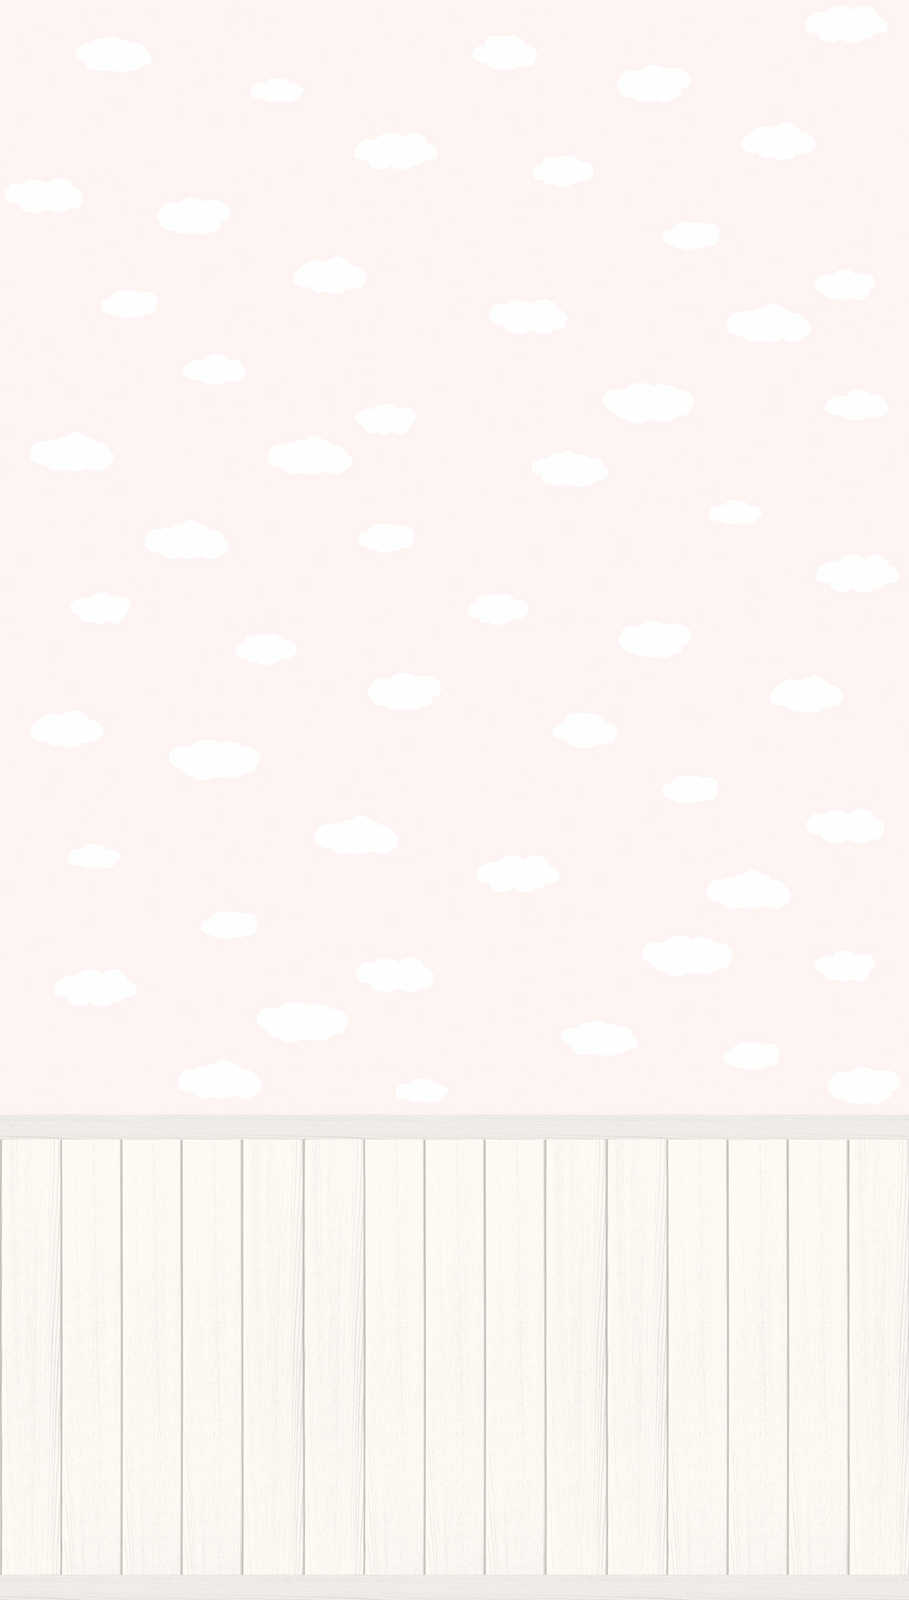             Non-woven motif wallpaper with wood-effect plinth border and cloud pattern - pink, white, grey
        